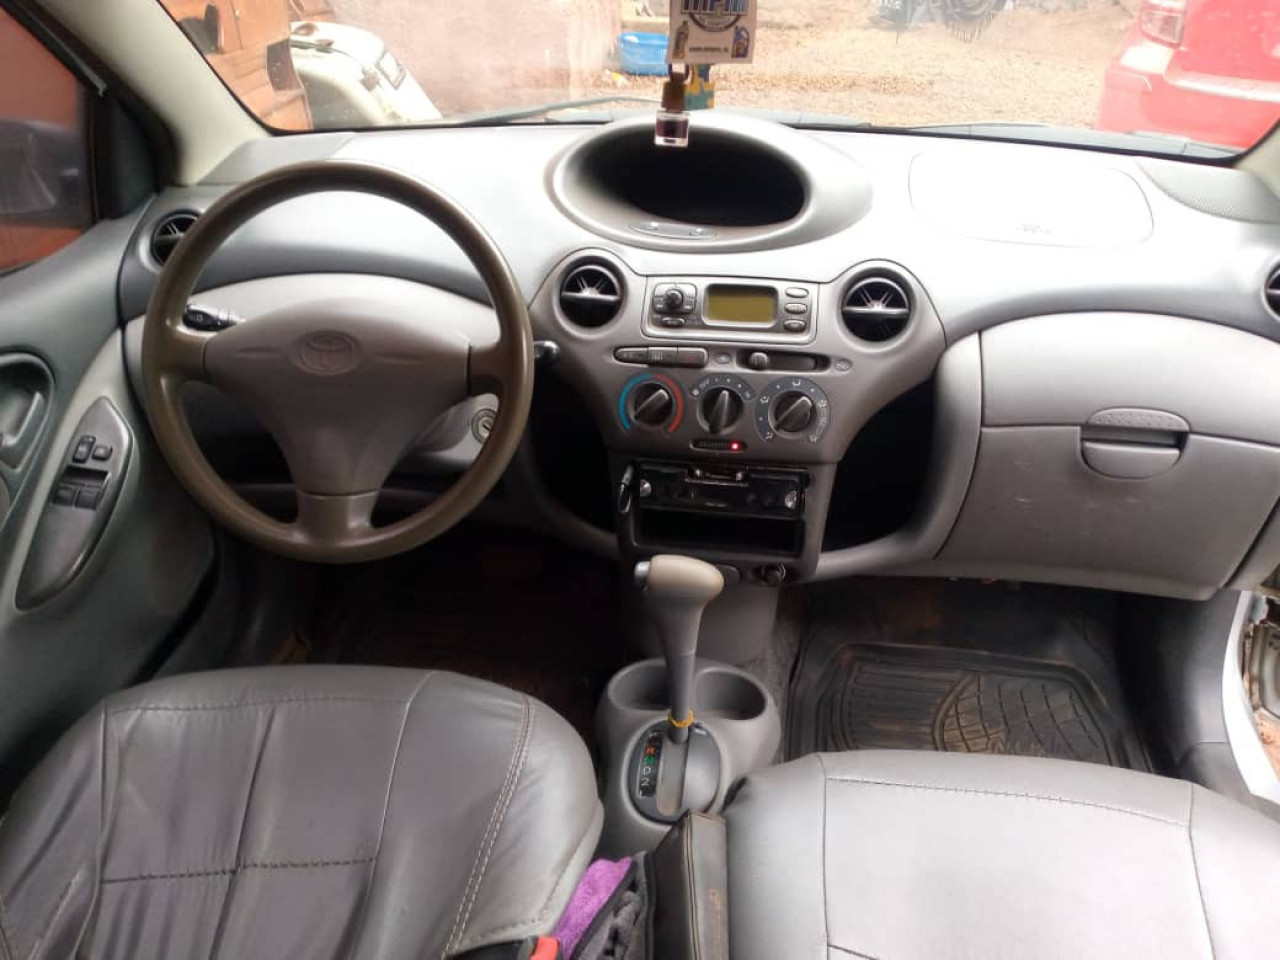 Toyota Yaris, Voitures, Conakry